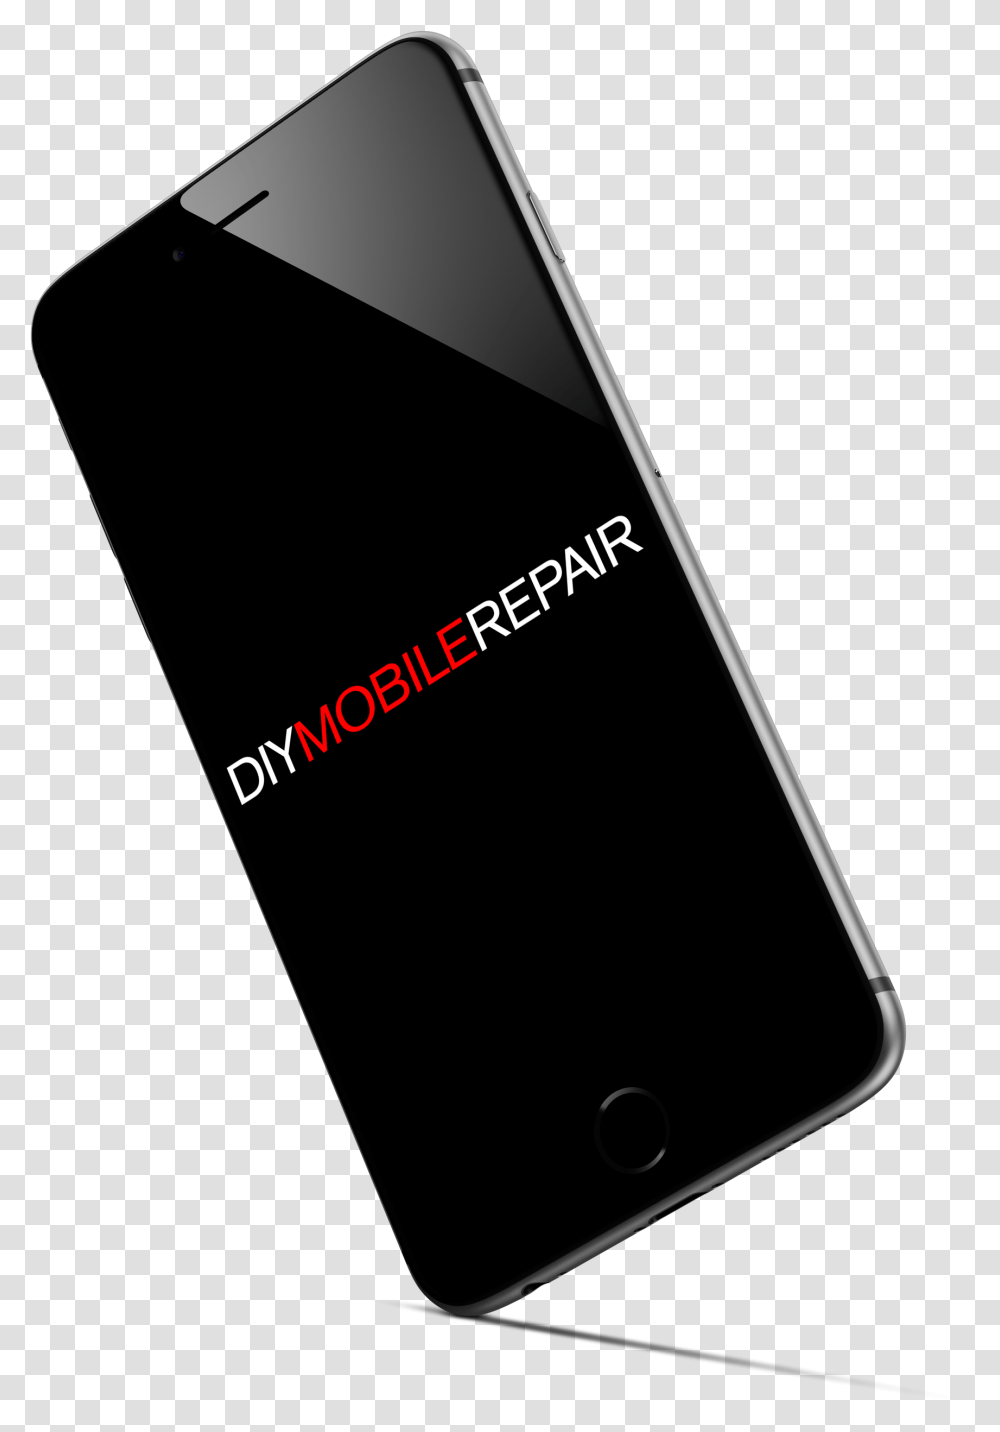 Cracked Phone Screen Download Smartphone, Electronics, Mobile Phone, Cell Phone, Iphone Transparent Png